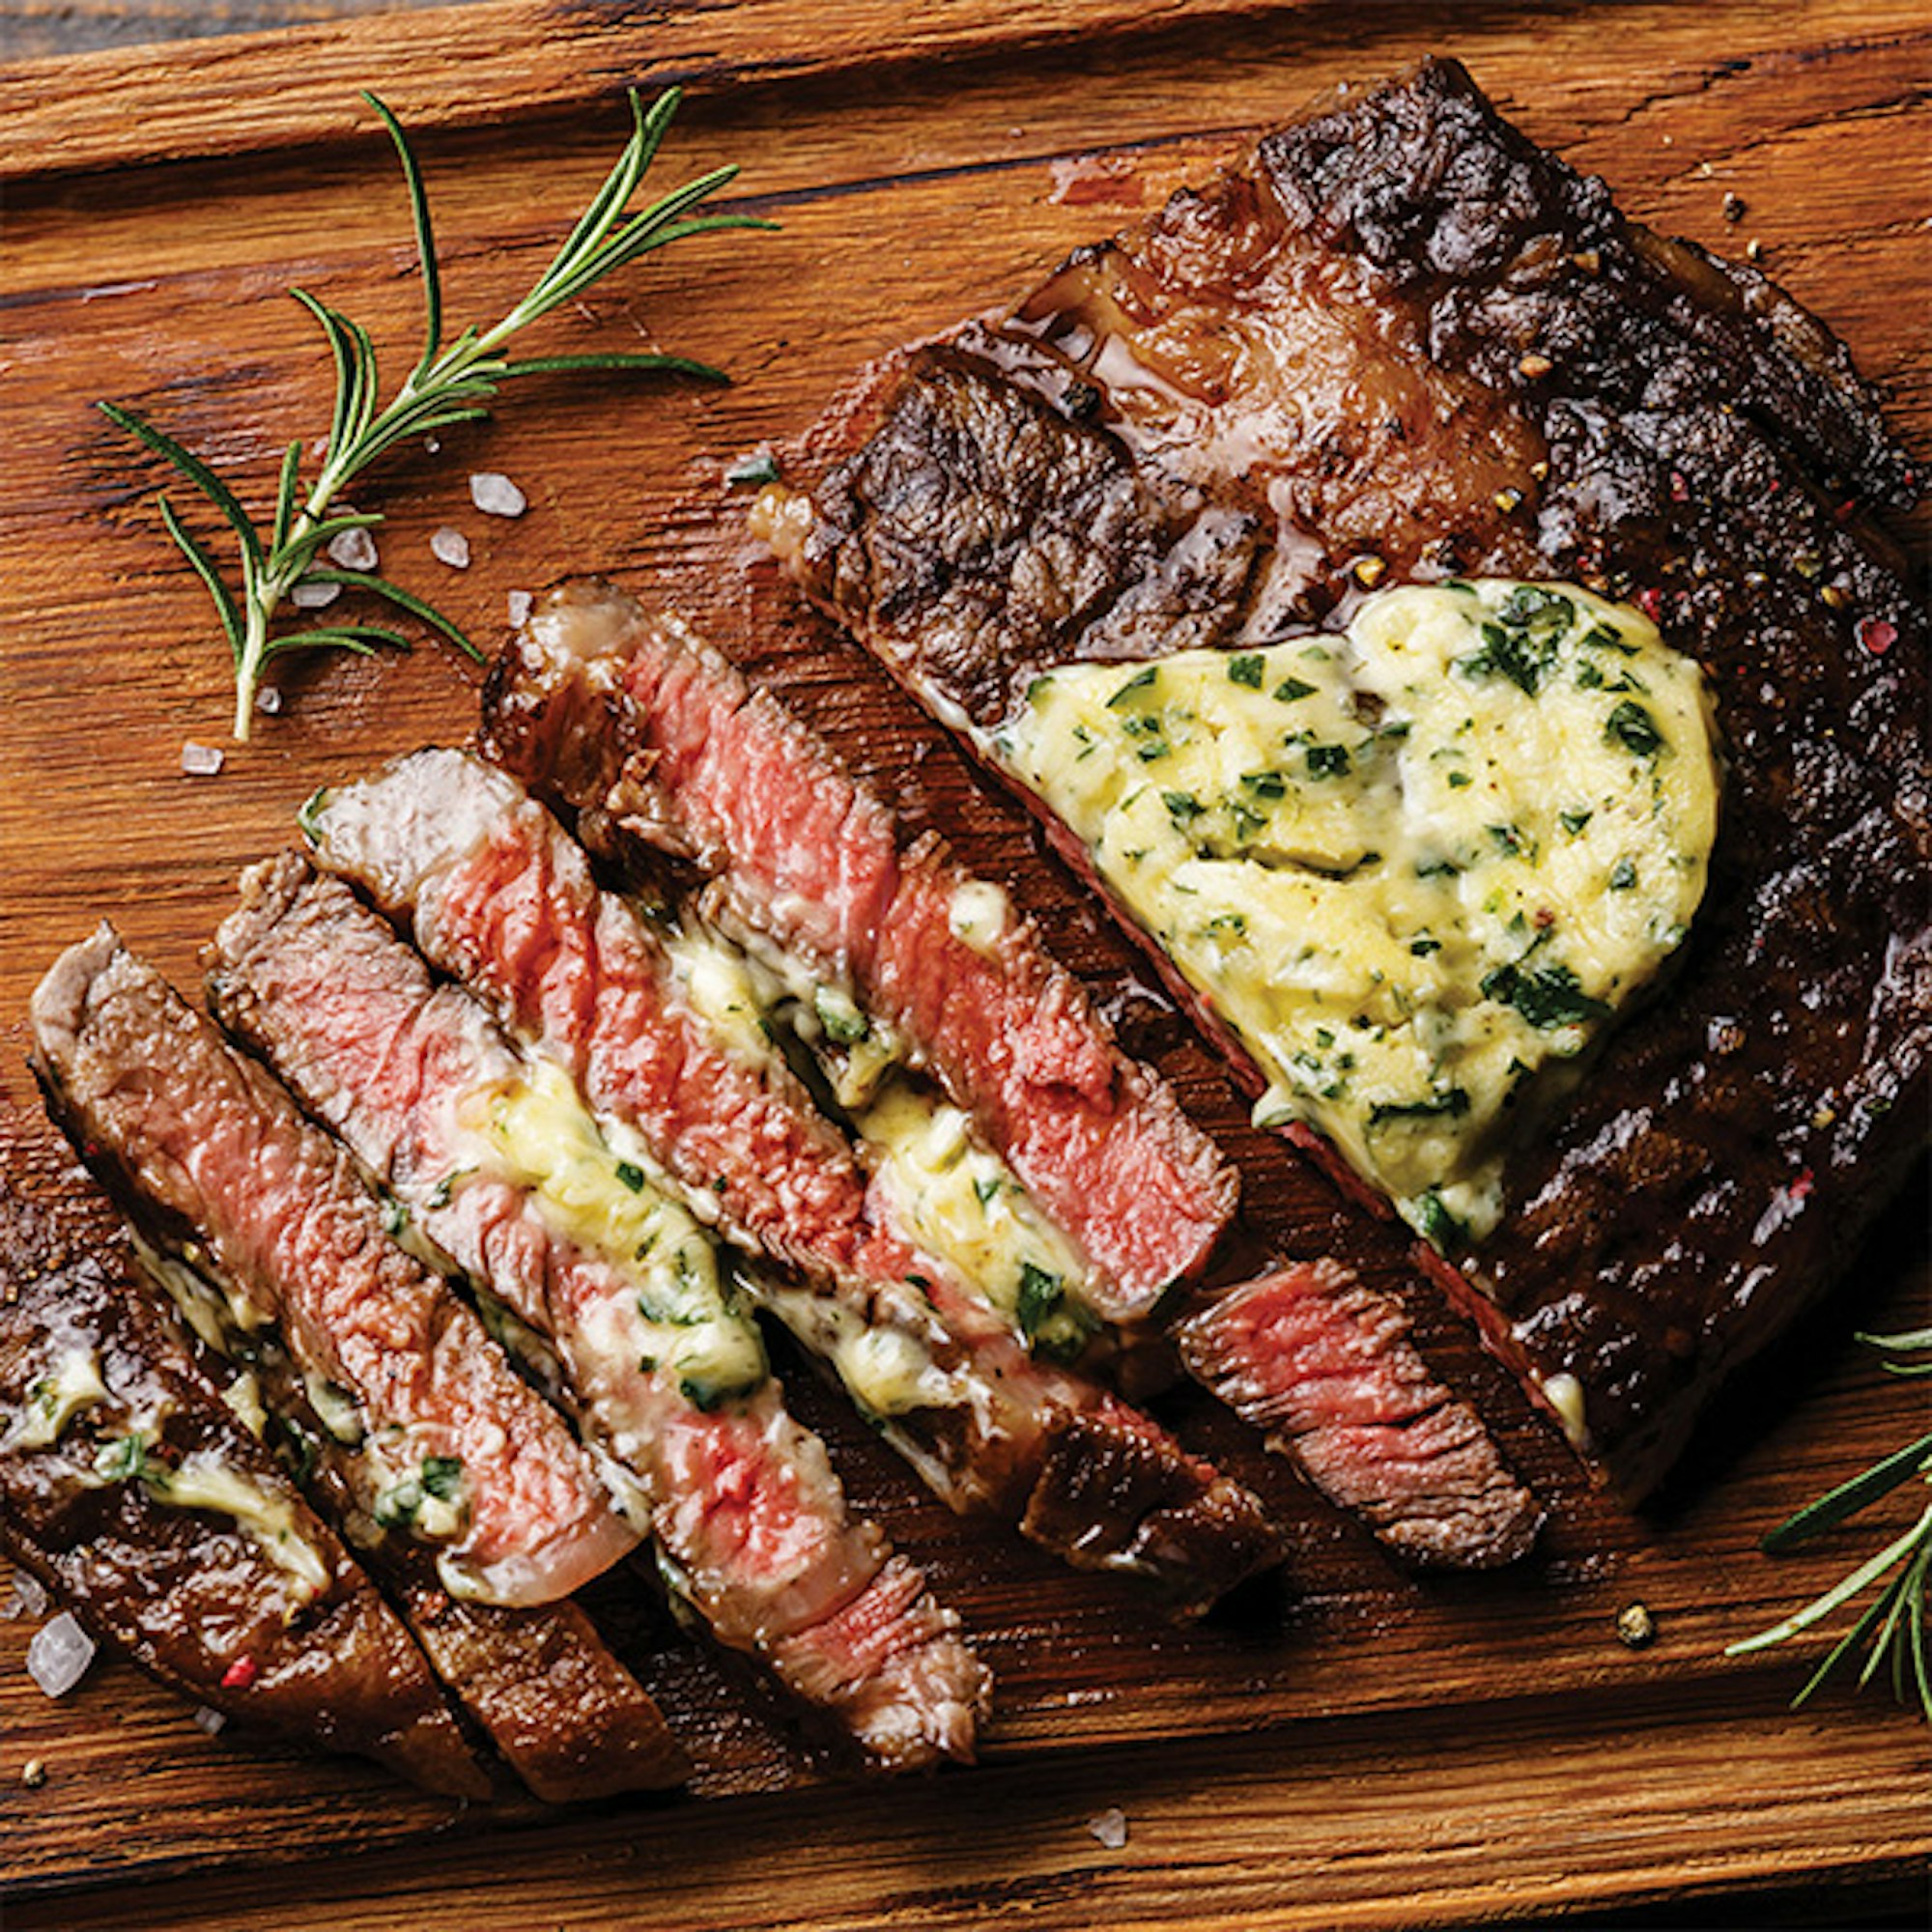 steak with herb butter on wooden board. How to reverse sear a steak